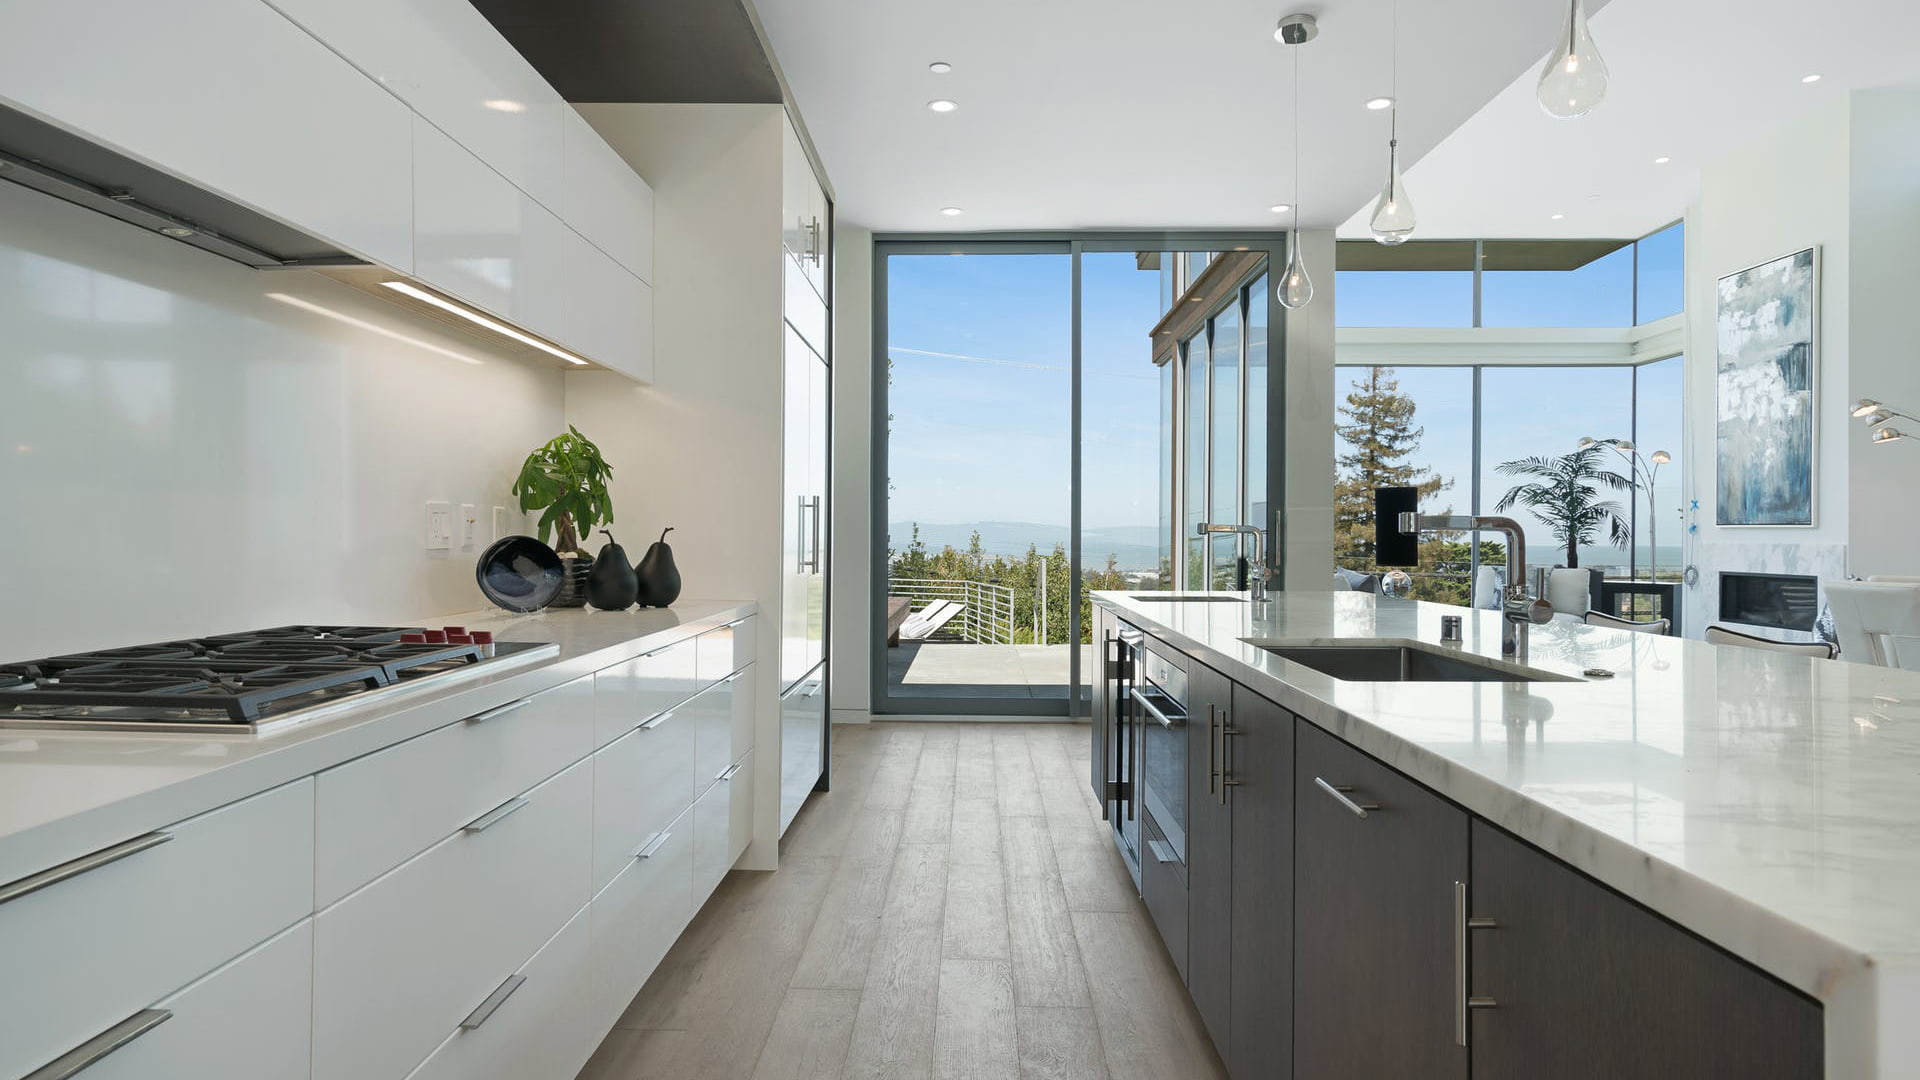 A galley kitchen with modern white cabinets and at the other side a sliding patio door